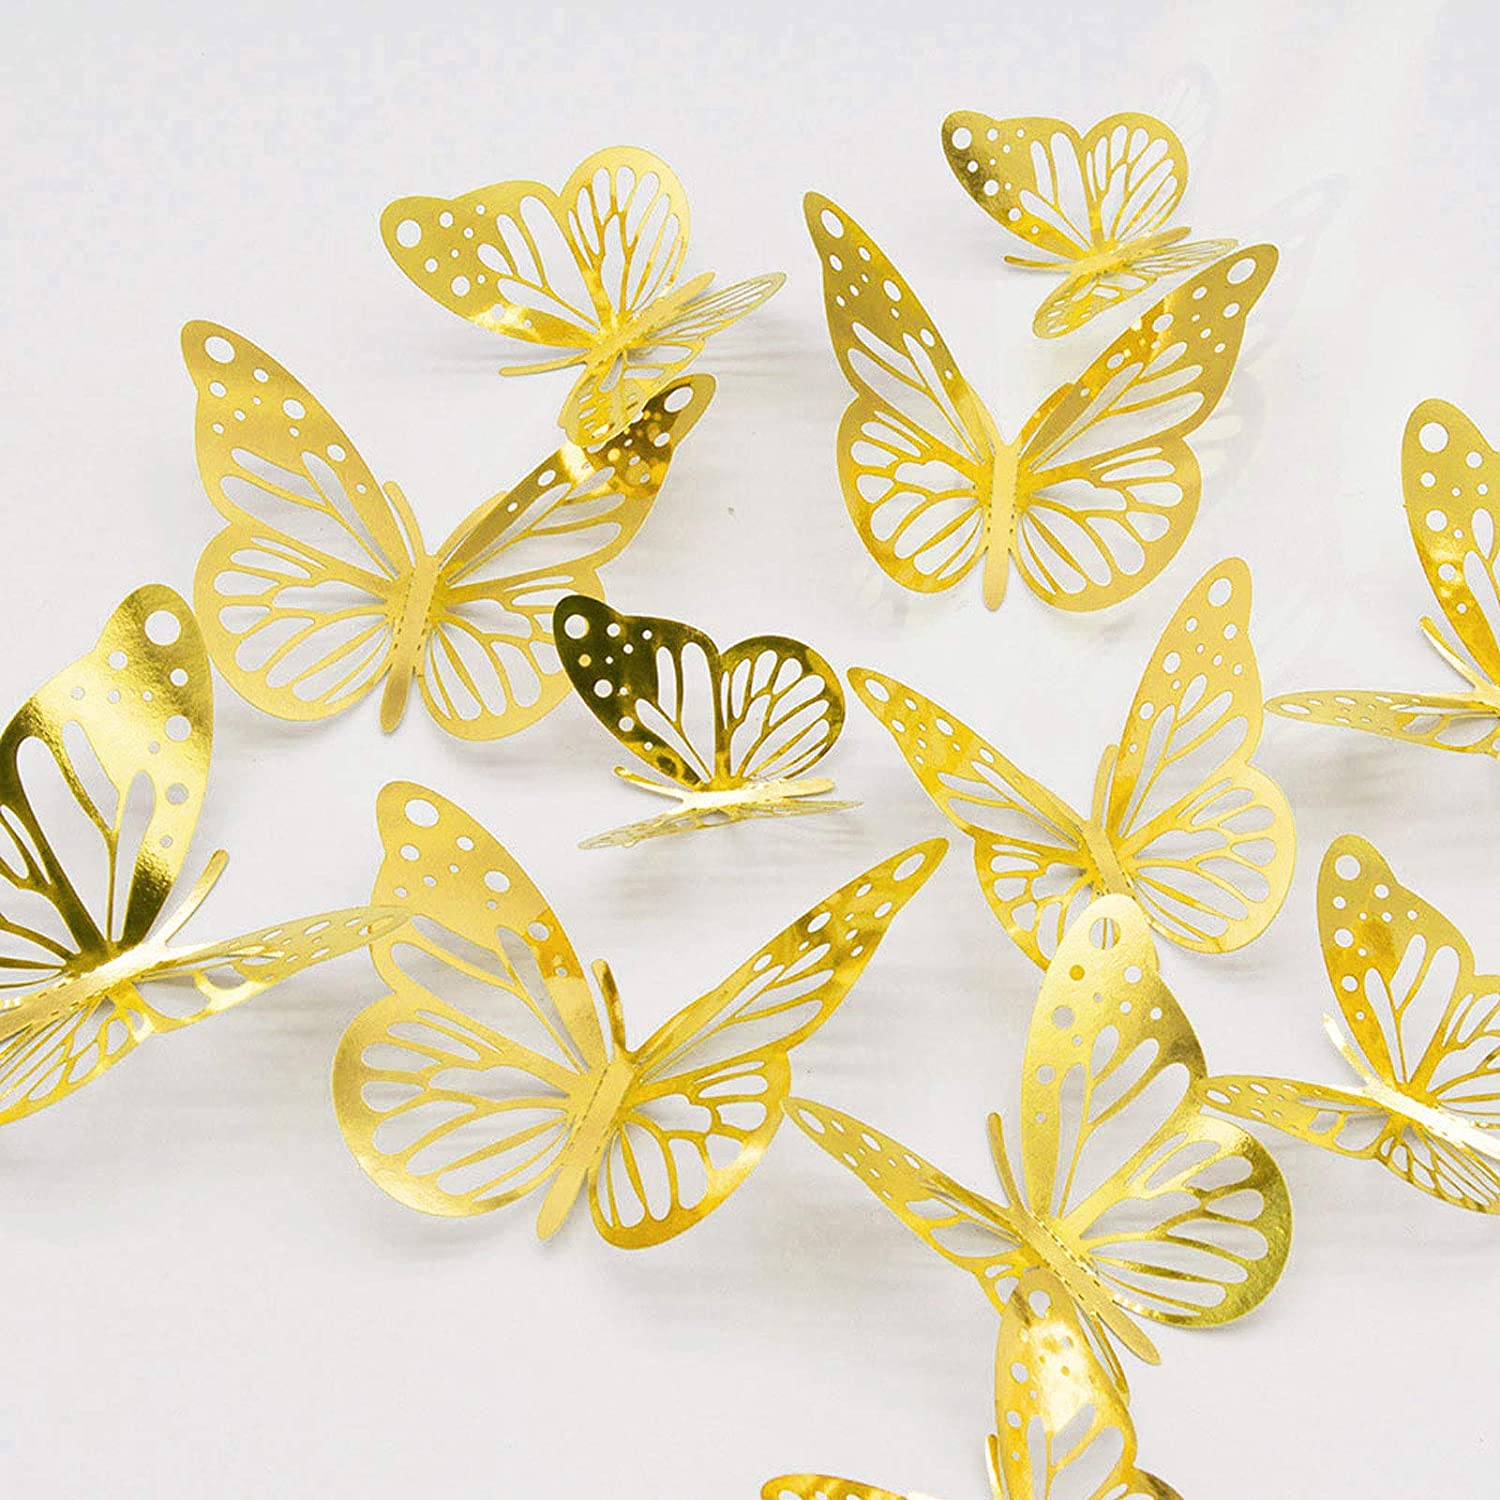 3-D Stick-On Butterflies, Pack of 12, Silver/Rose Gold/Gold